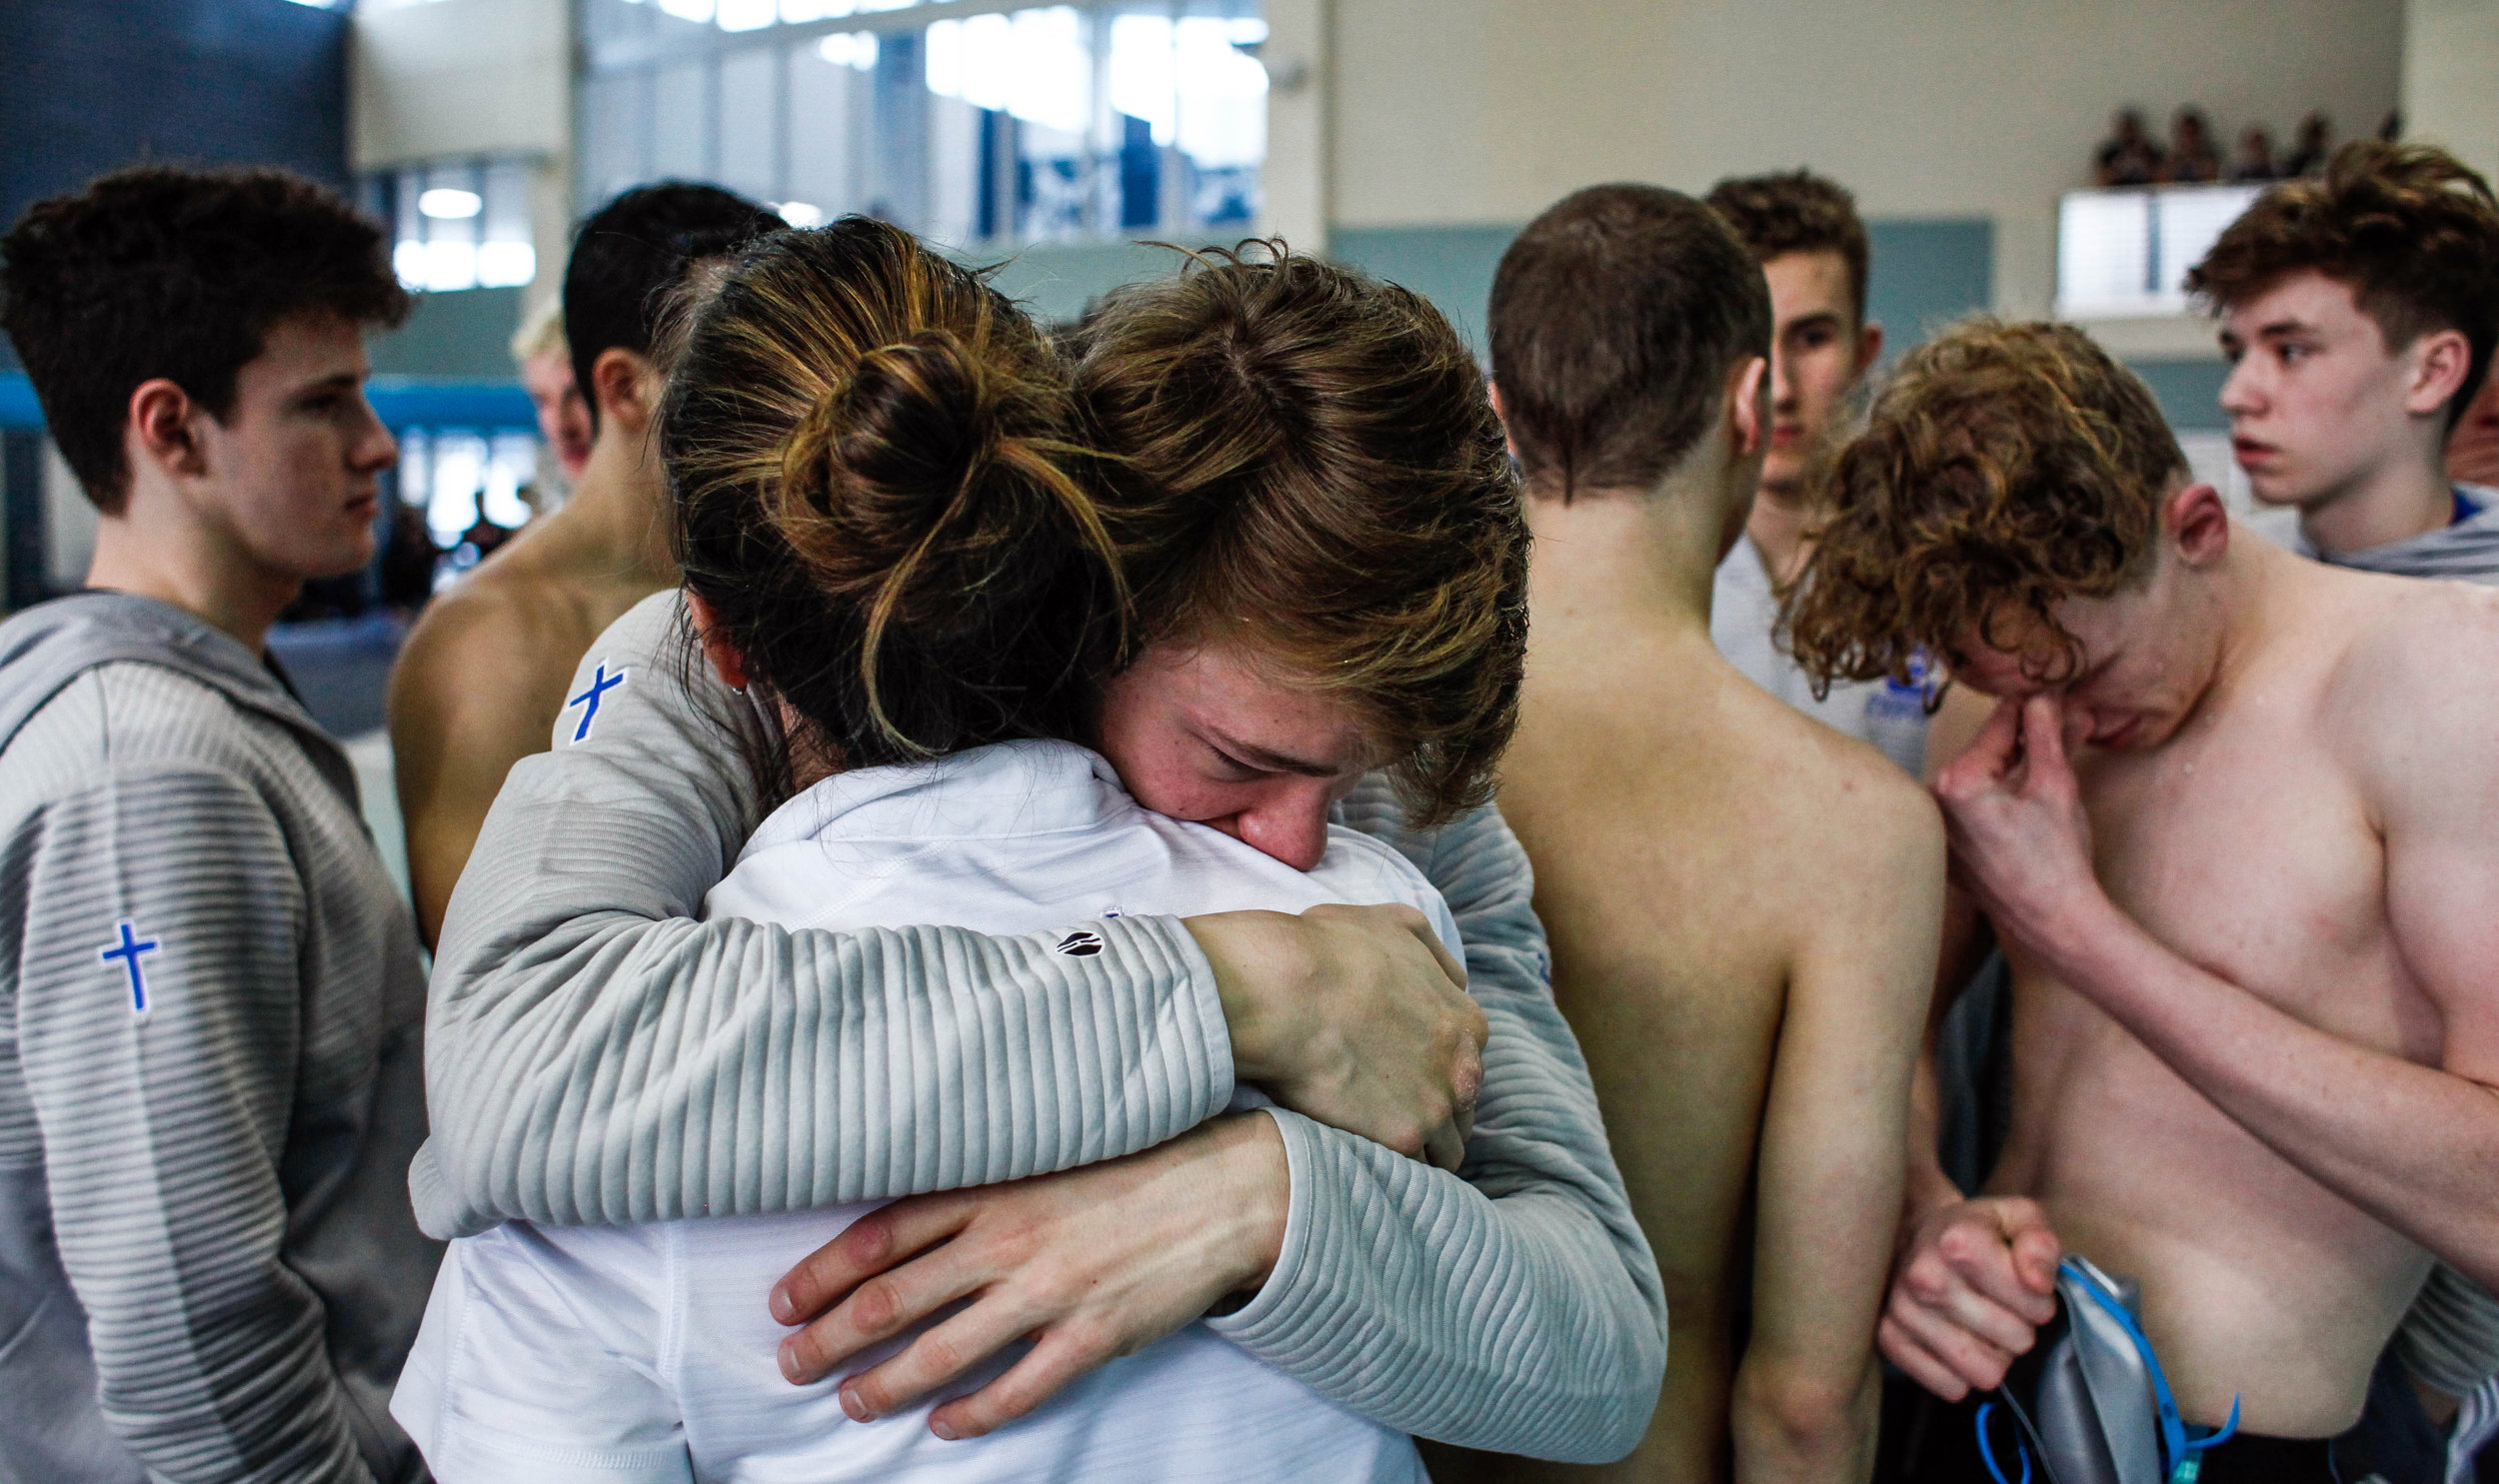  Detroit Catholic Central swimmers console each other after placing runner-up in the Division 1 boys swimming state finals at the Holland Aquatic Center in Holland, Michigan on Saturday, March 9, 2019. 